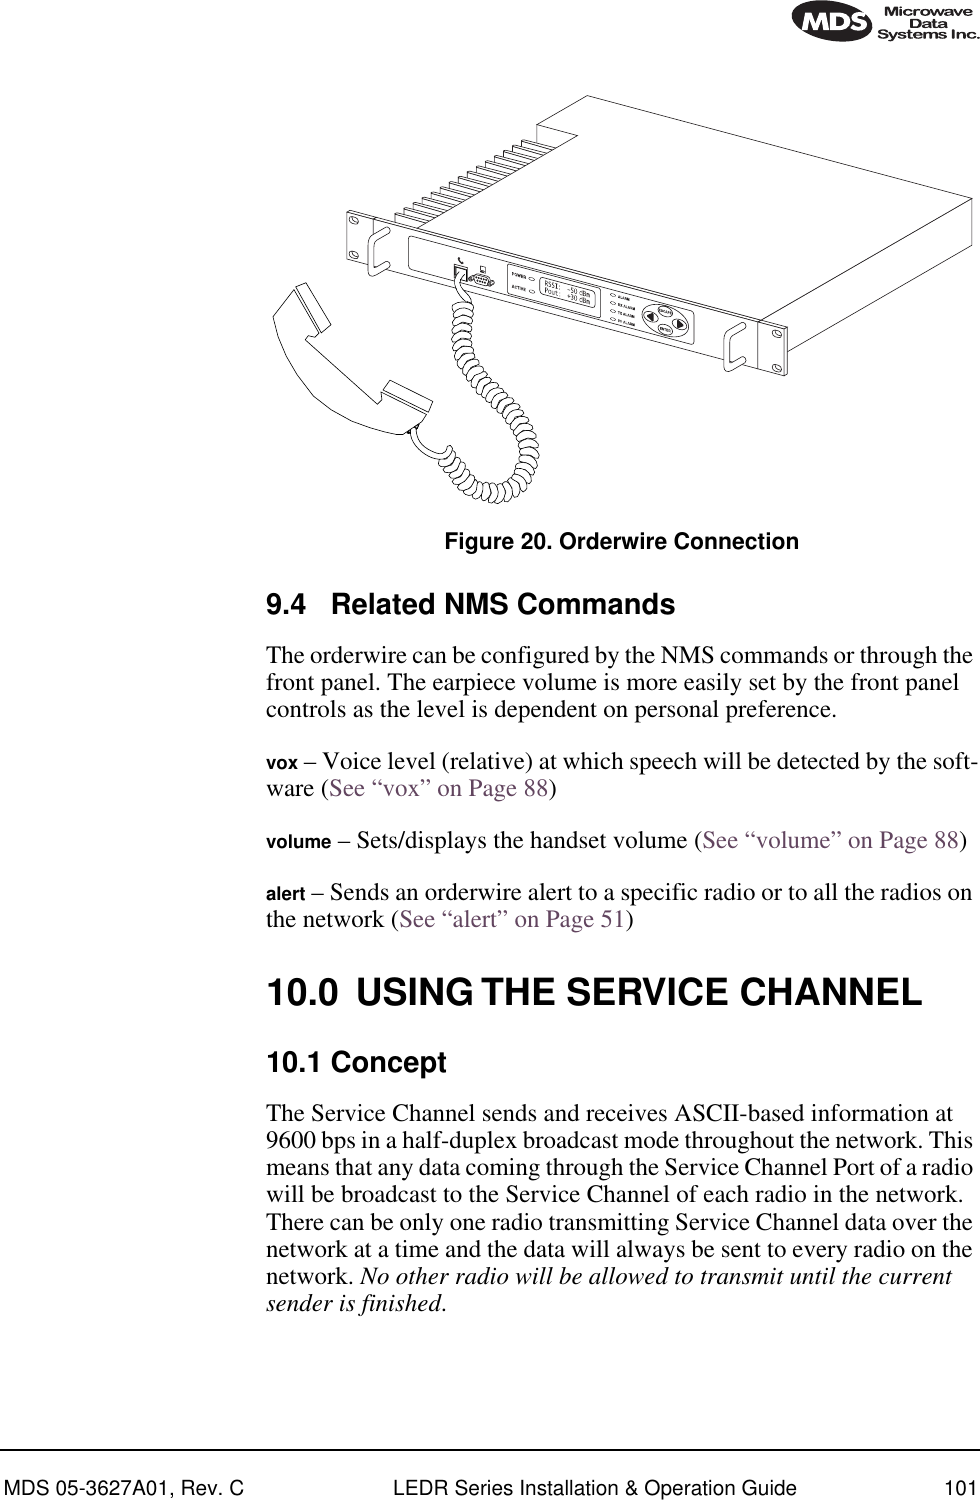 MDS 05-3627A01, Rev. C LEDR Series Installation &amp; Operation Guide 101Invisible place holderFigure 20. Orderwire Connection9.4 Related NMS CommandsThe orderwire can be configured by the NMS commands or through the front panel. The earpiece volume is more easily set by the front panel controls as the level is dependent on personal preference.vox – Voice level (relative) at which speech will be detected by the soft-ware (See “vox” on Page 88)volume – Sets/displays the handset volume (See “volume” on Page 88)alert – Sends an orderwire alert to a specific radio or to all the radios on the network (See “alert” on Page 51)10.0 USING THE SERVICE CHANNEL10.1 ConceptThe Service Channel sends and receives ASCII-based information at 9600 bps in a half-duplex broadcast mode throughout the network. This means that any data coming through the Service Channel Port of a radio will be broadcast to the Service Channel of each radio in the network. There can be only one radio transmitting Service Channel data over the network at a time and the data will always be sent to every radio on the network. No other radio will be allowed to transmit until the current sender is finished.